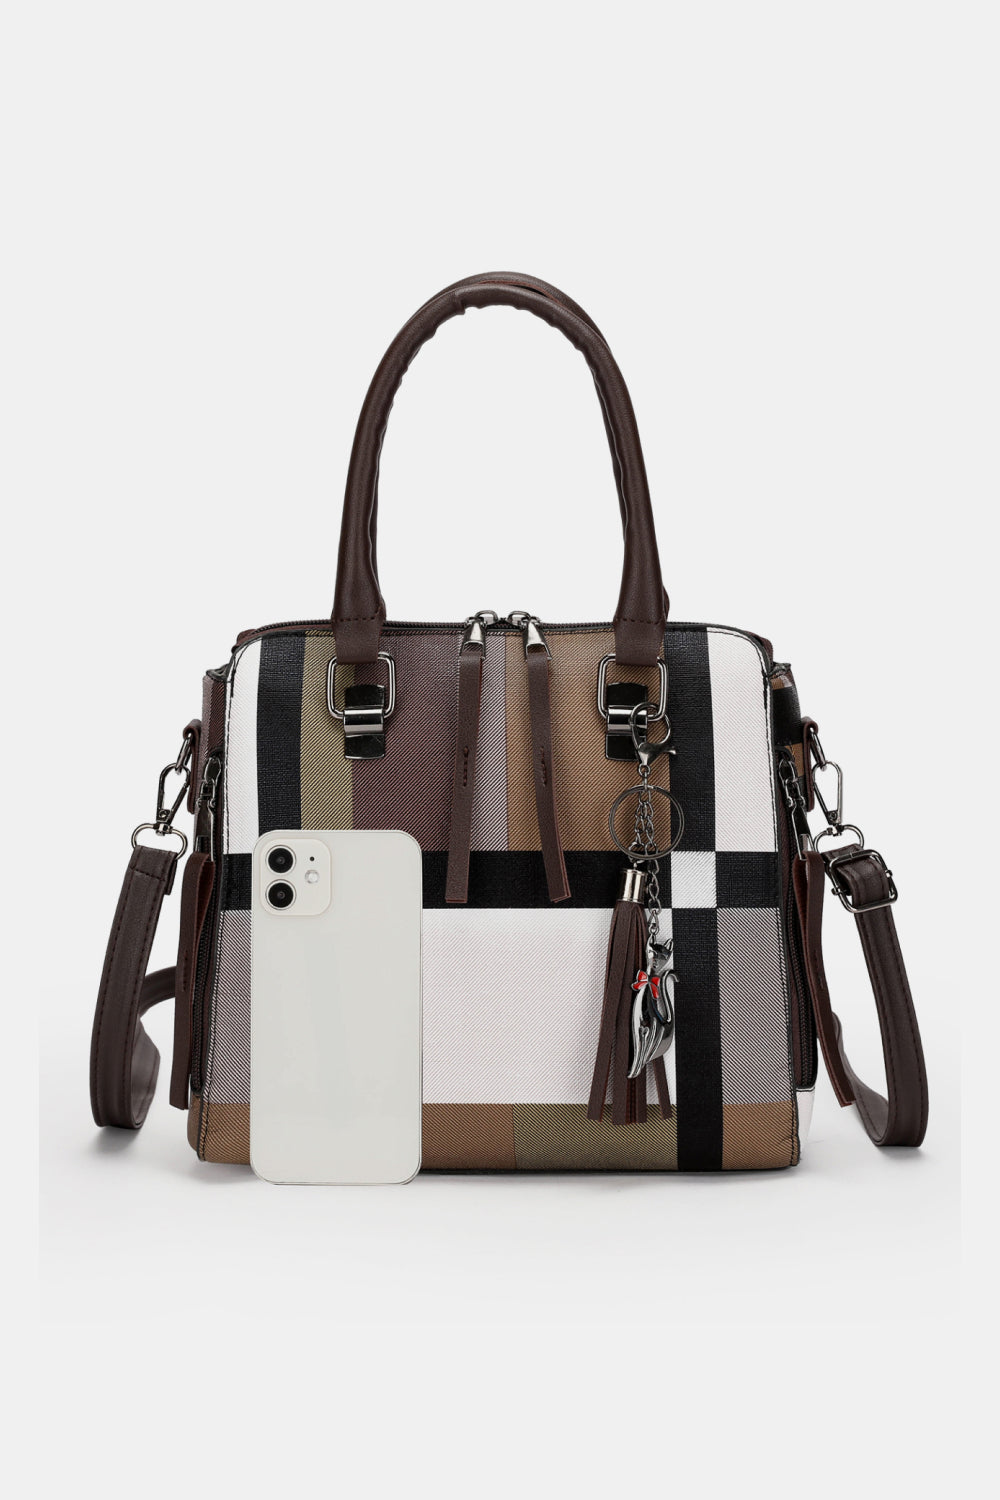 Multi-Color Bag:  PU Leather Bag Set Available in Several Color Options